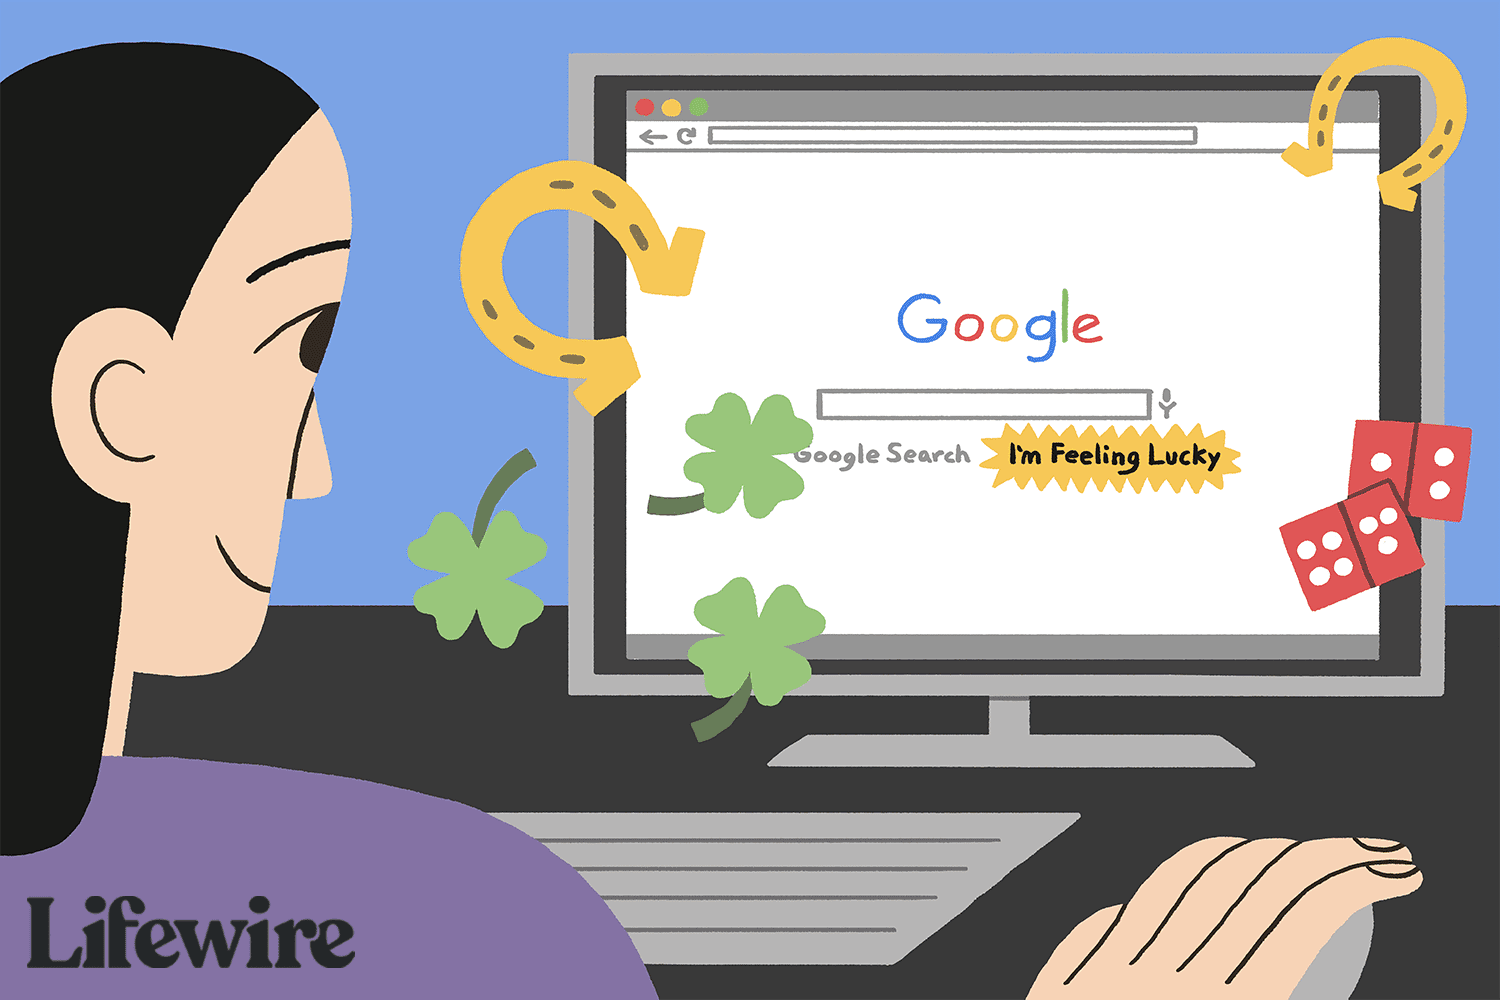 A person interacts with Google's homepage, surrounded by symbols of luck like horseshoes, clovers, and dice.